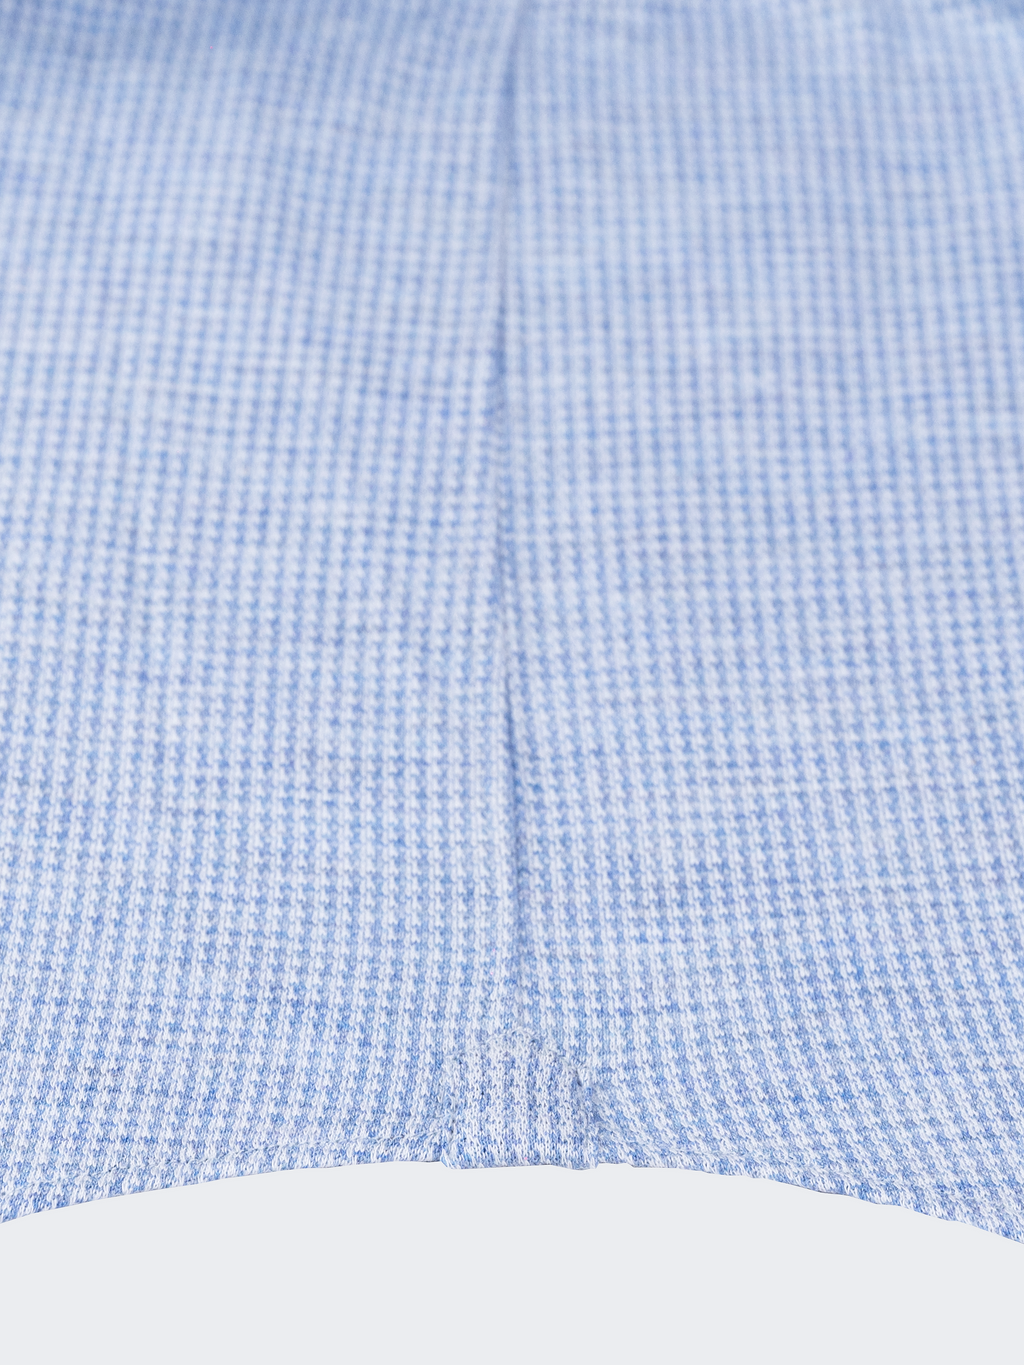 Sky Houndstooth | Knitted Shirt